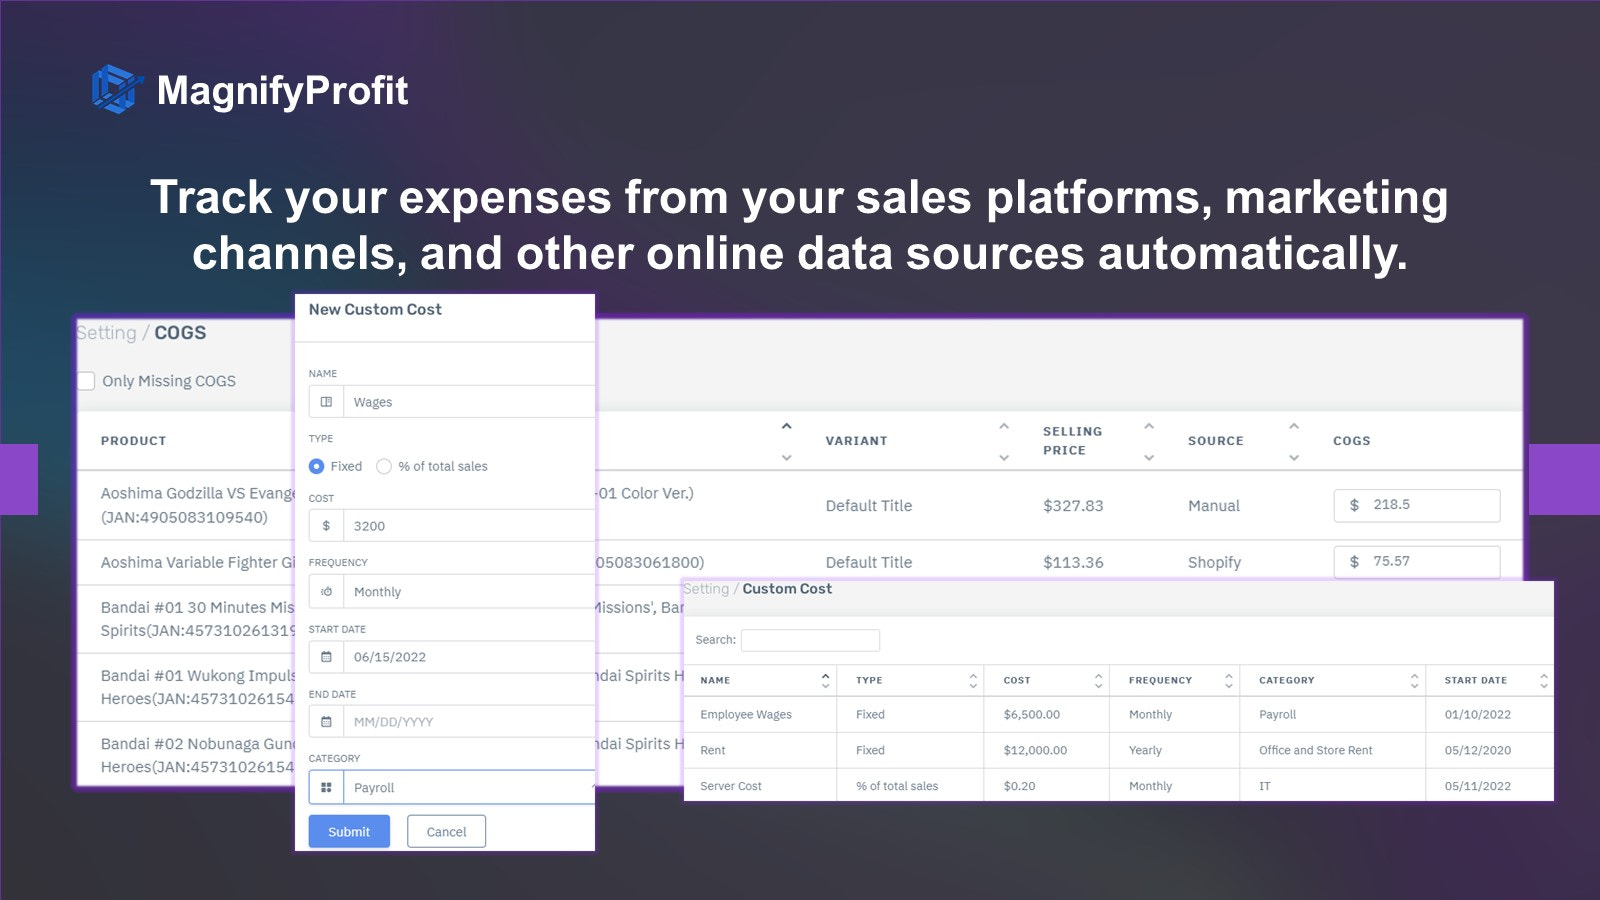 Track your expenses from sales platforms, marketing channels